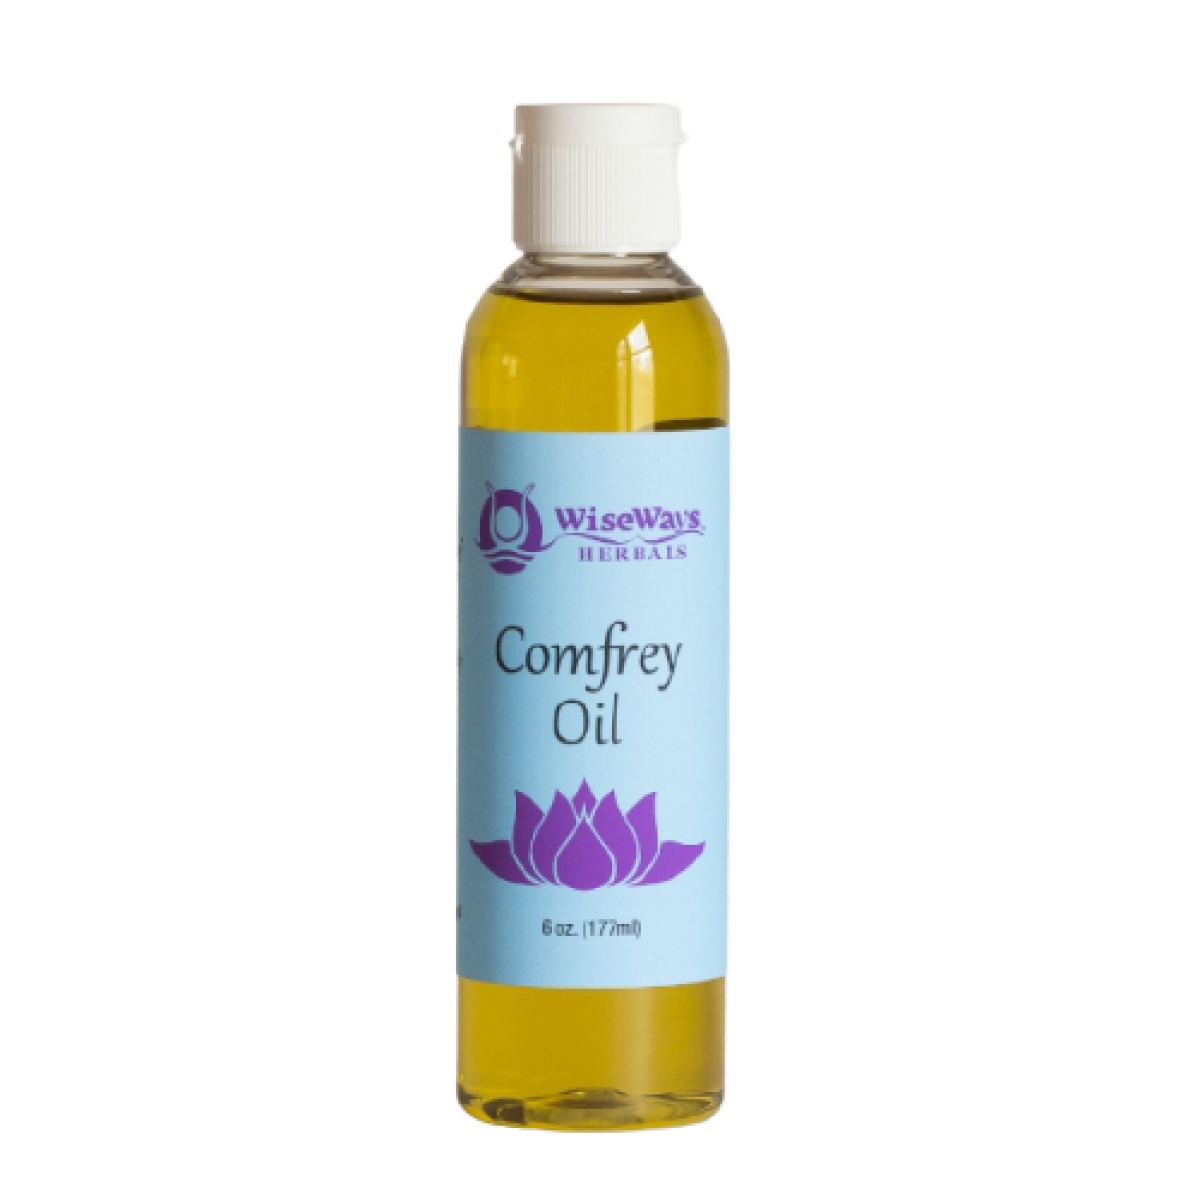 Primary image of Comfrey Oil